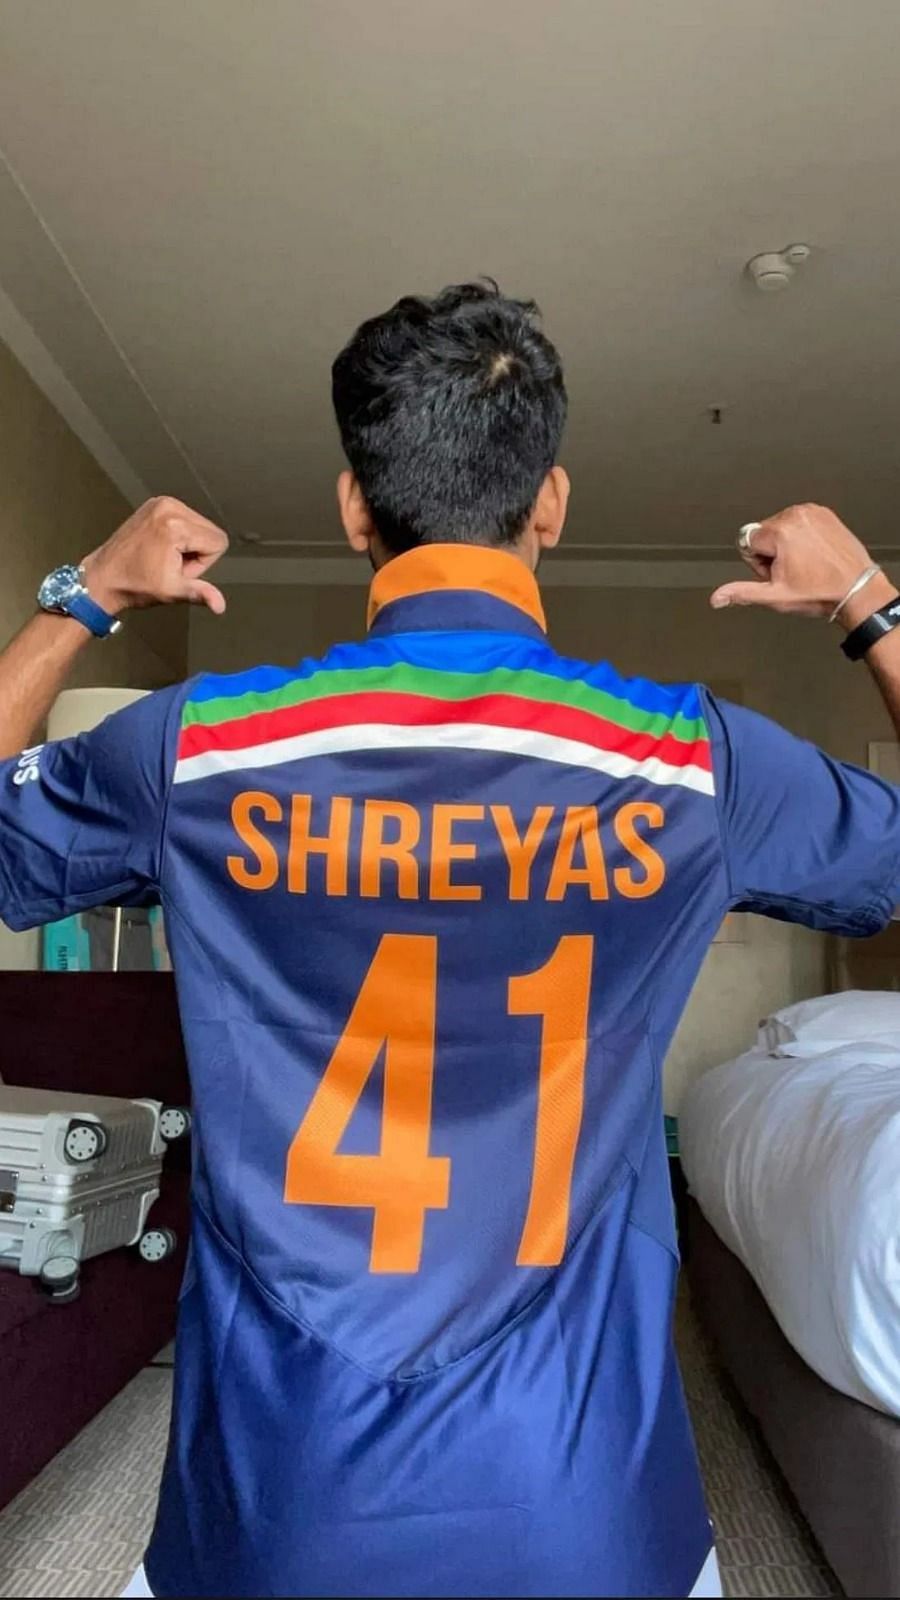 new india jersey